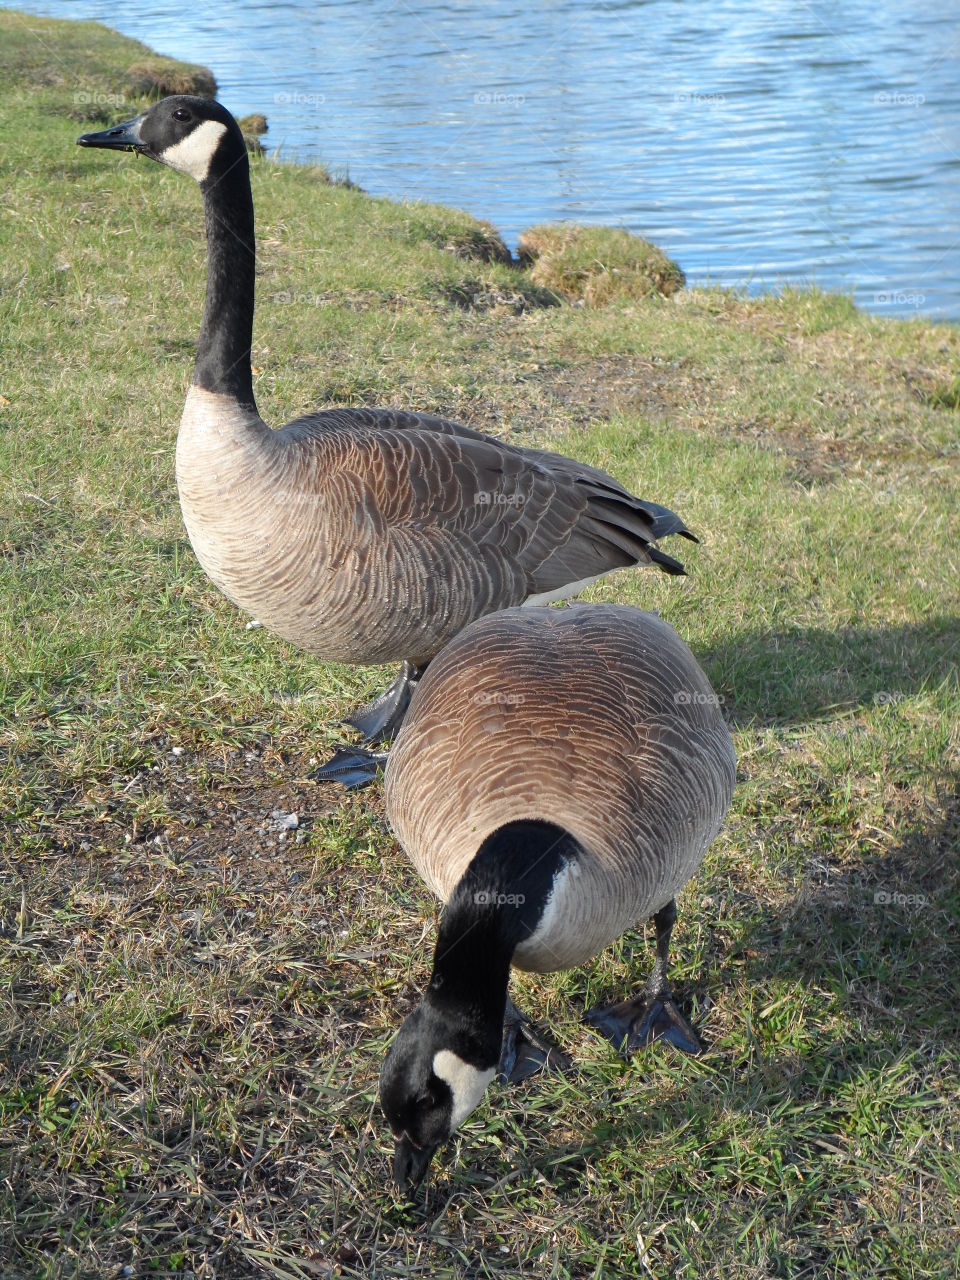 Canadian geese eating. Geese eating grass